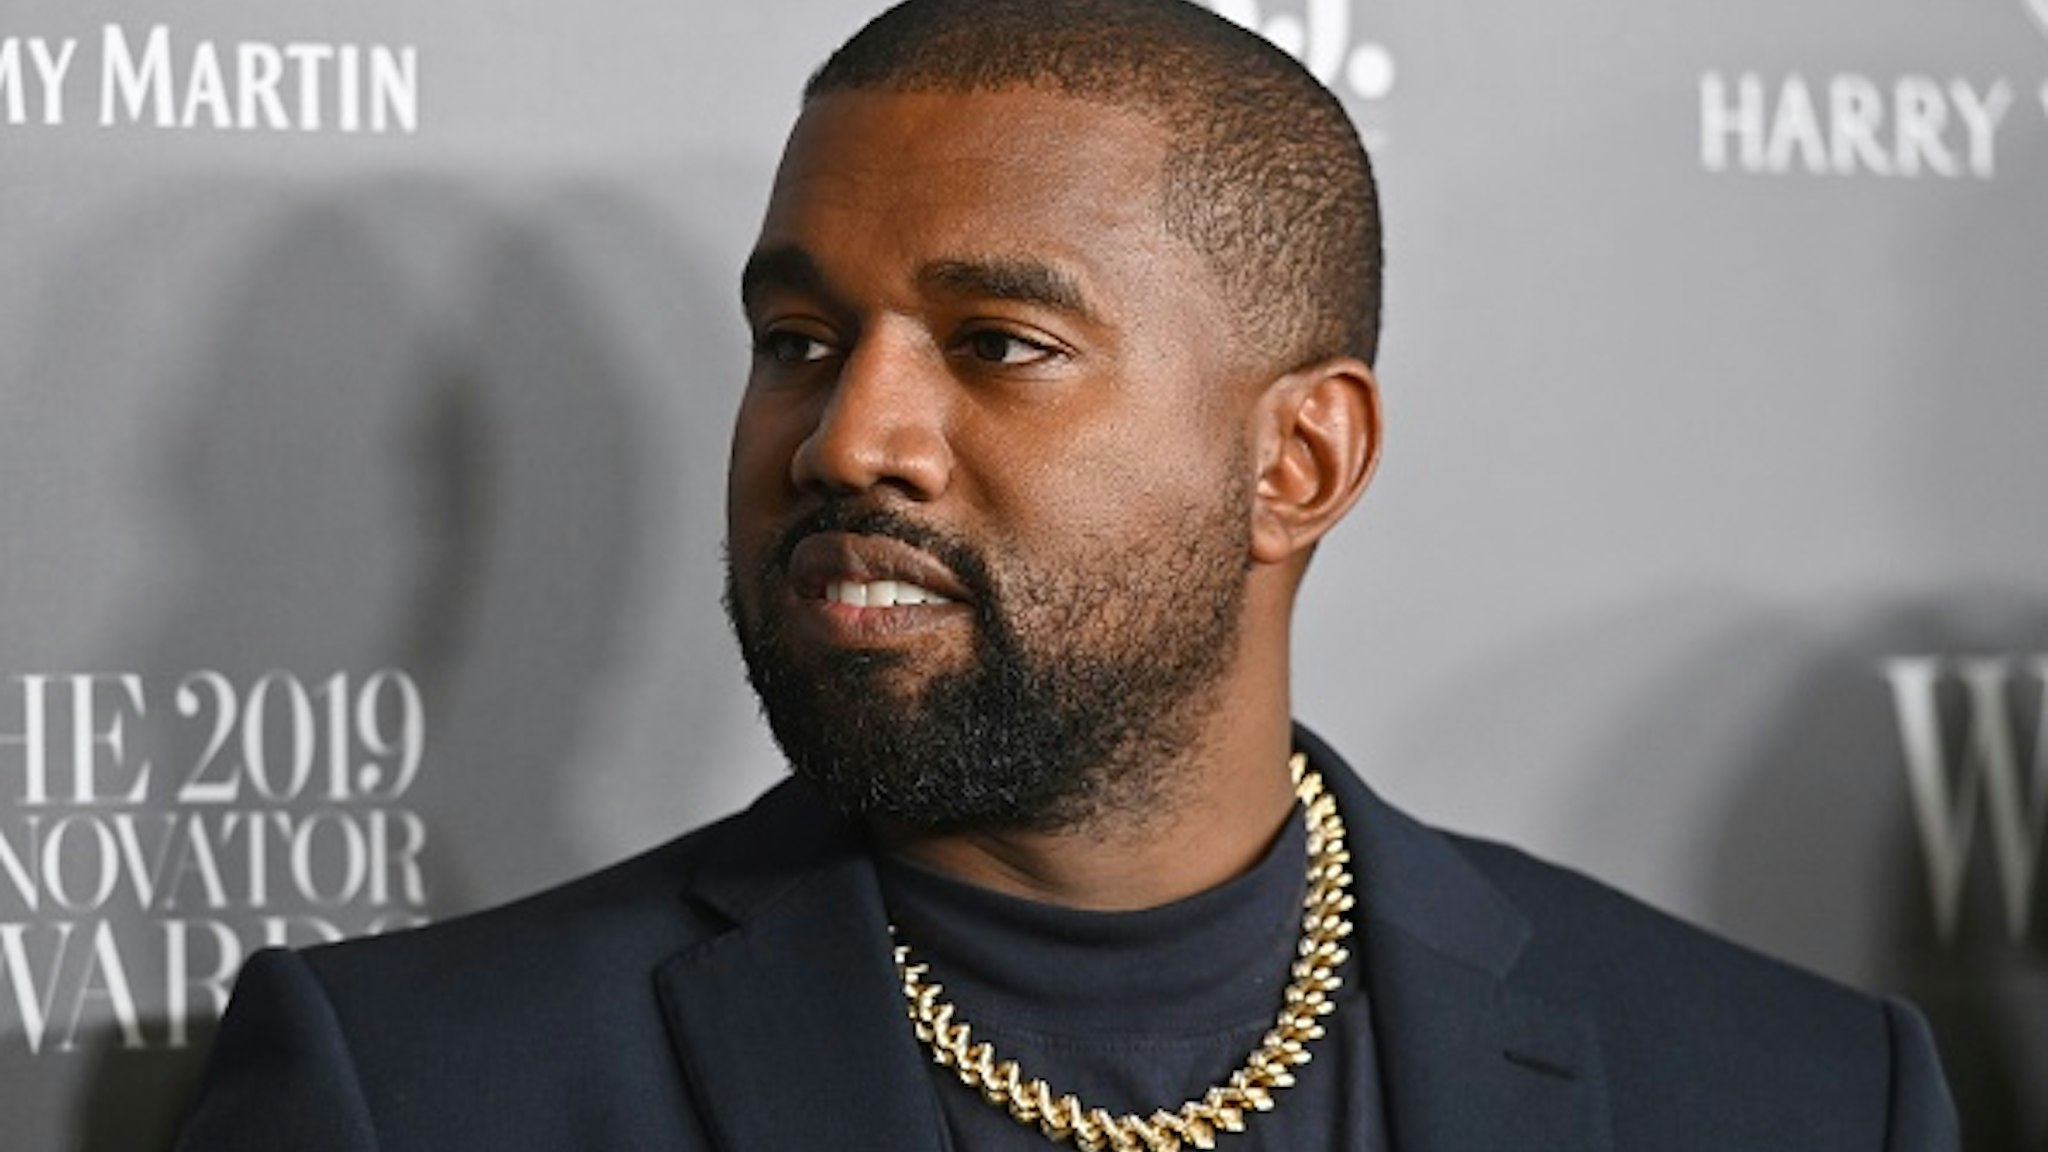 US rapper Kanye West attends the WSJ Magazine 2019 Innovator Awards at MOMA on November 6, 2019 in New York City.